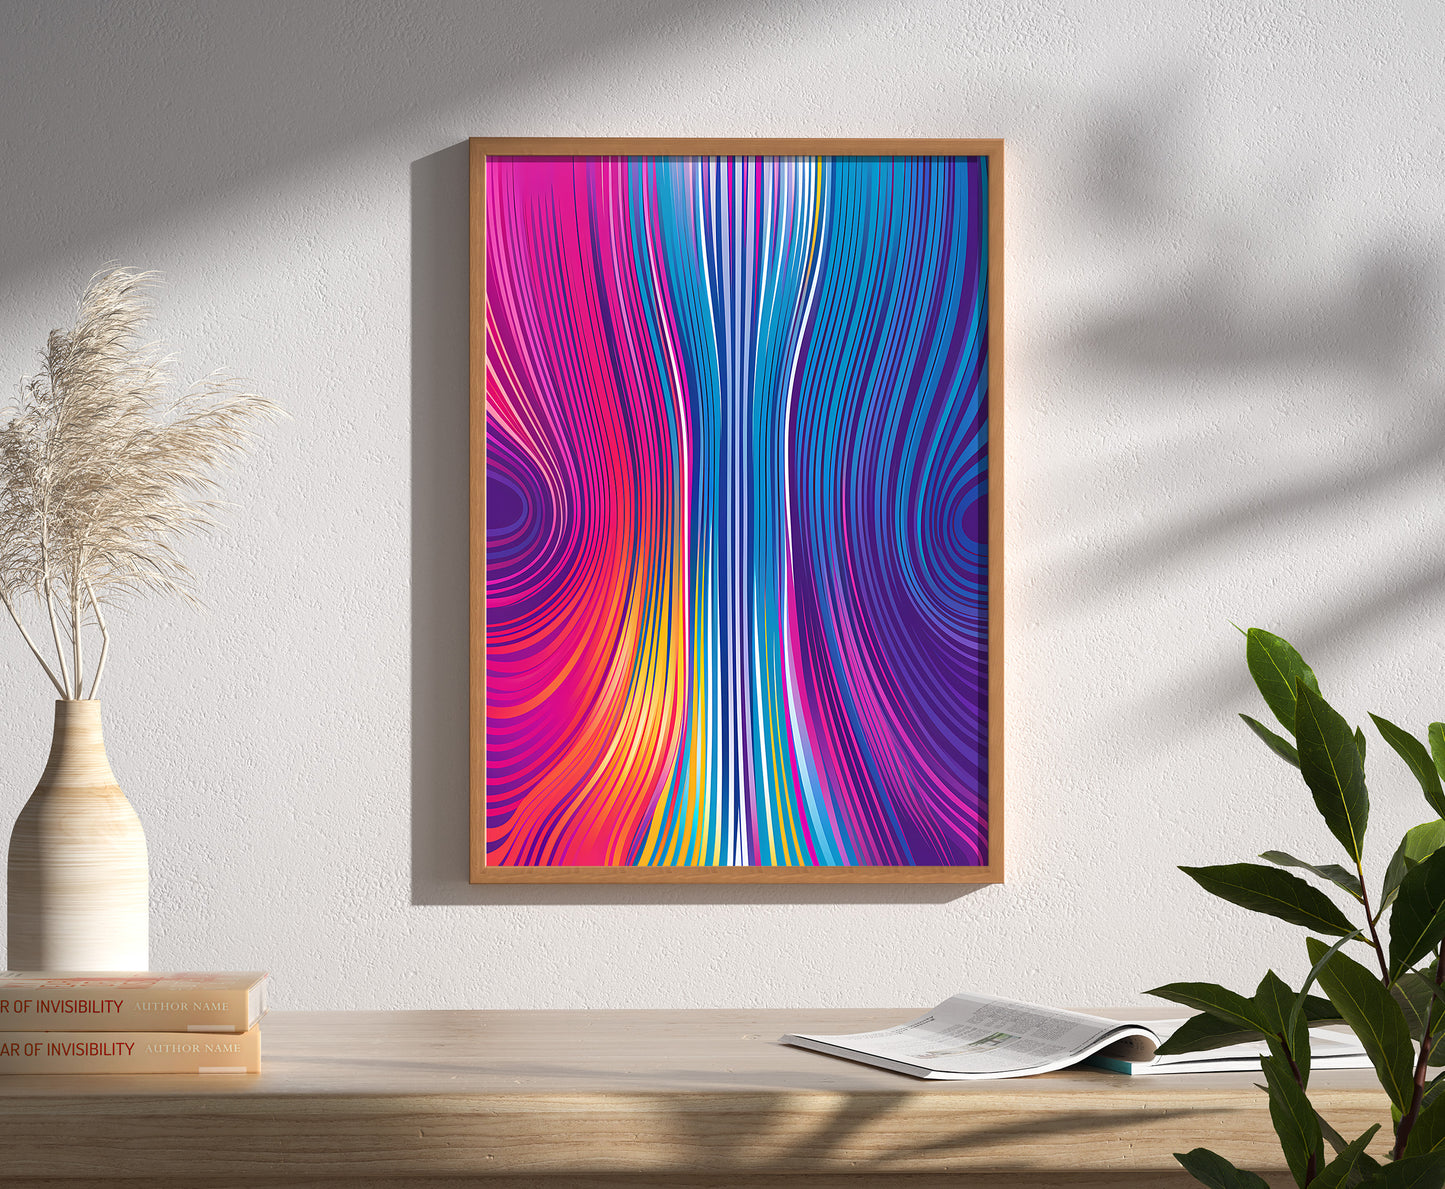 Colorful abstract art print framed on a wall, with a plant and books on a side table.